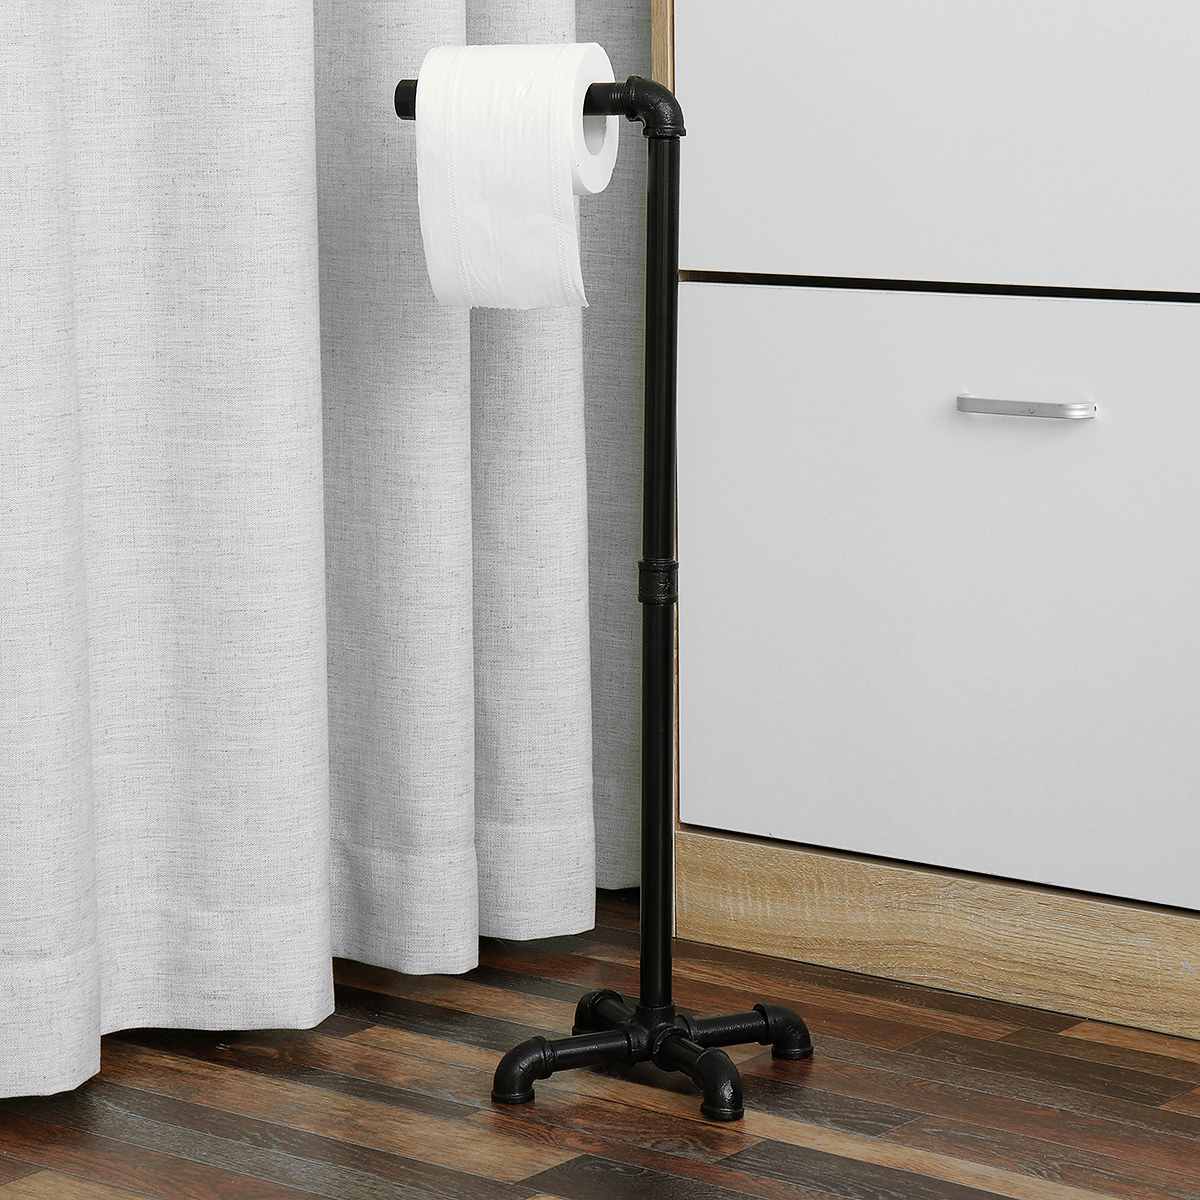 Iron Large Toilet Paper Holder Stand Reserv Storage Dispenser Free Standing Holder Bathroom Roll Tissue Paper Roll Stand